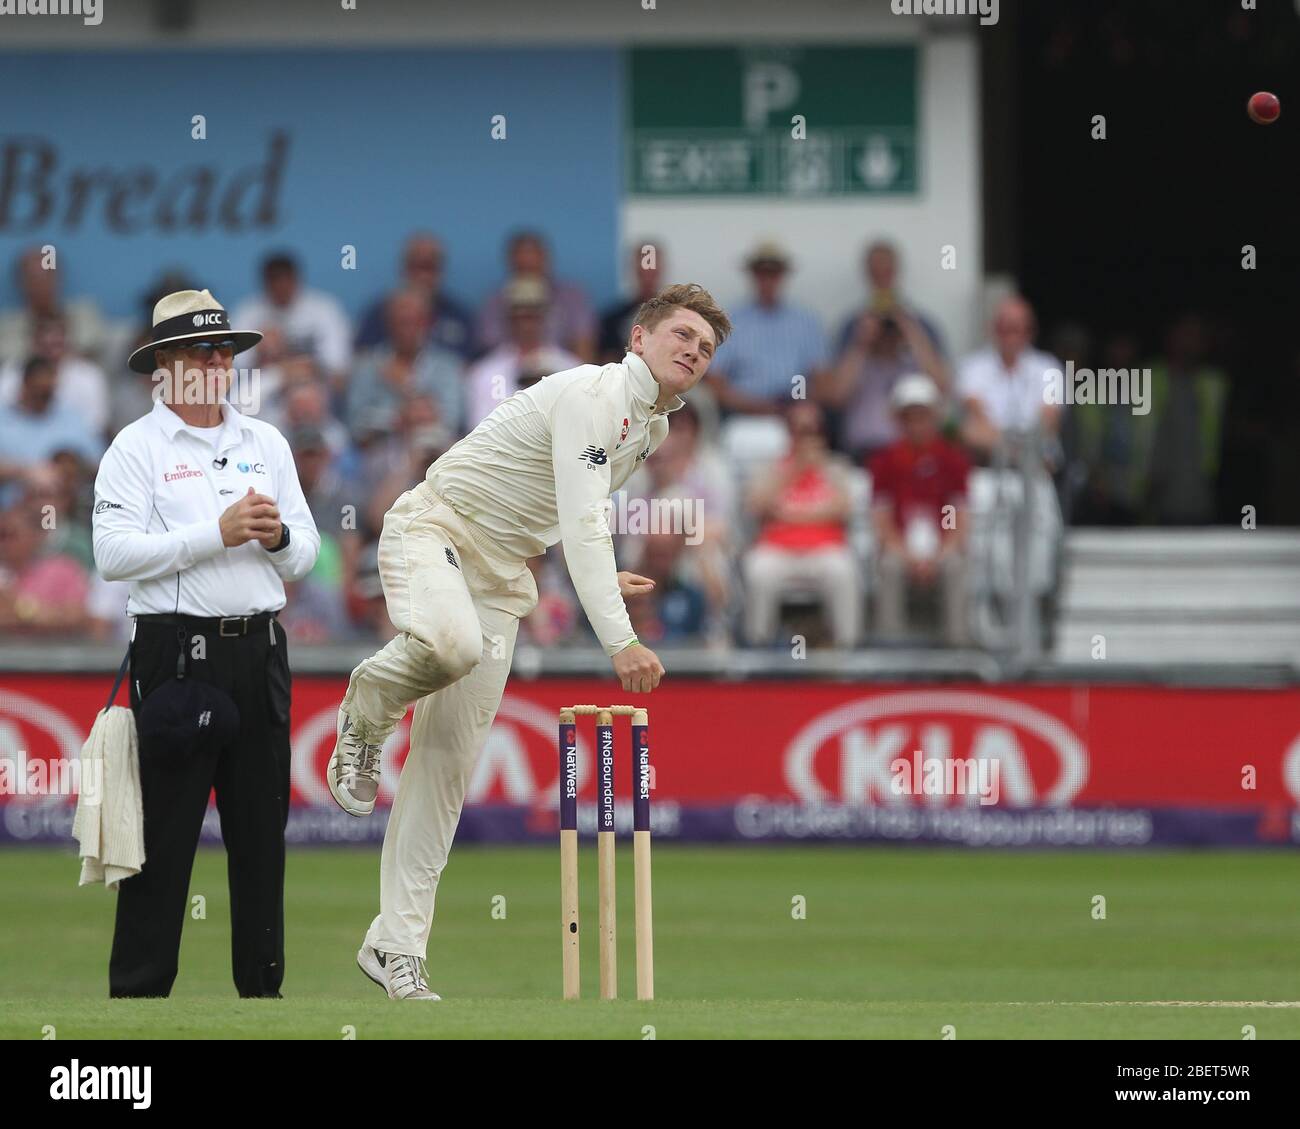 LEEDS, UK - JUNE 3rd Dom Bess of England bowling during the third day of the Second Nat West Test match between England and Pakistan at Headingley Cricket Ground, Leeds on Sunday 3rd June 2018. (Credit: Mark Fletcher | MI News) Stock Photo